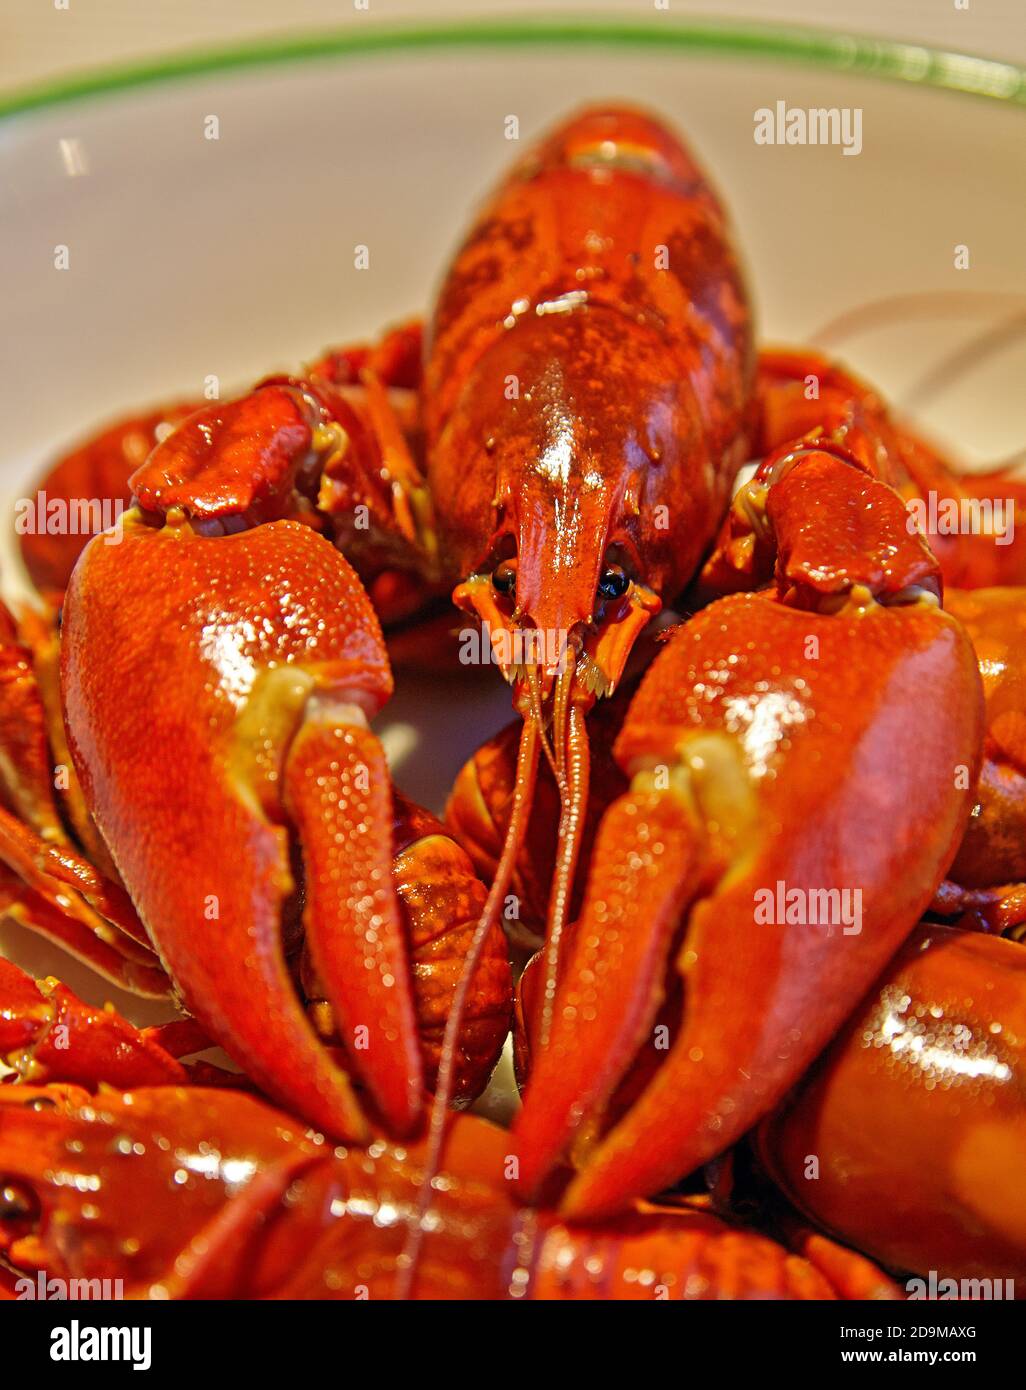 Detail of crayfish with head and claws. sormland region. Malmkoping Sweden, Europe. Stock Photo